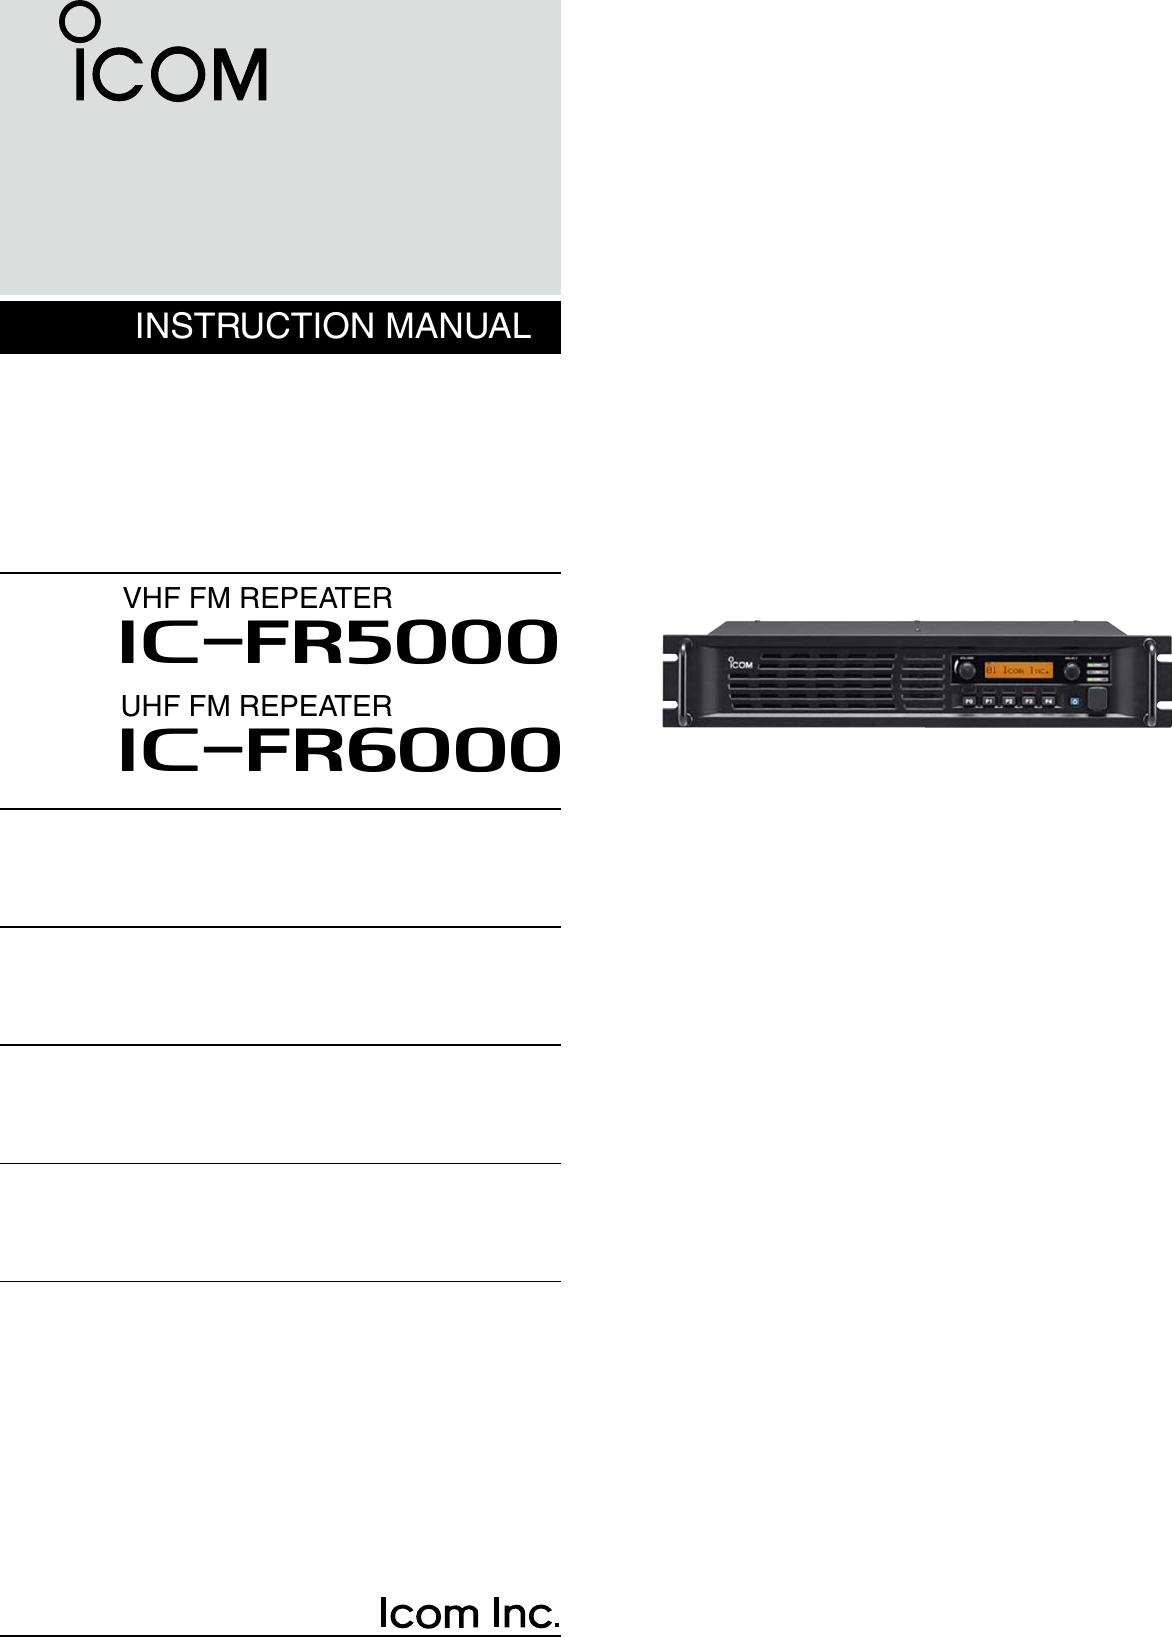 INSTRUCTION MANUALVHF FM REPEATERiFR5000iFR6000UHF FM REPEATER